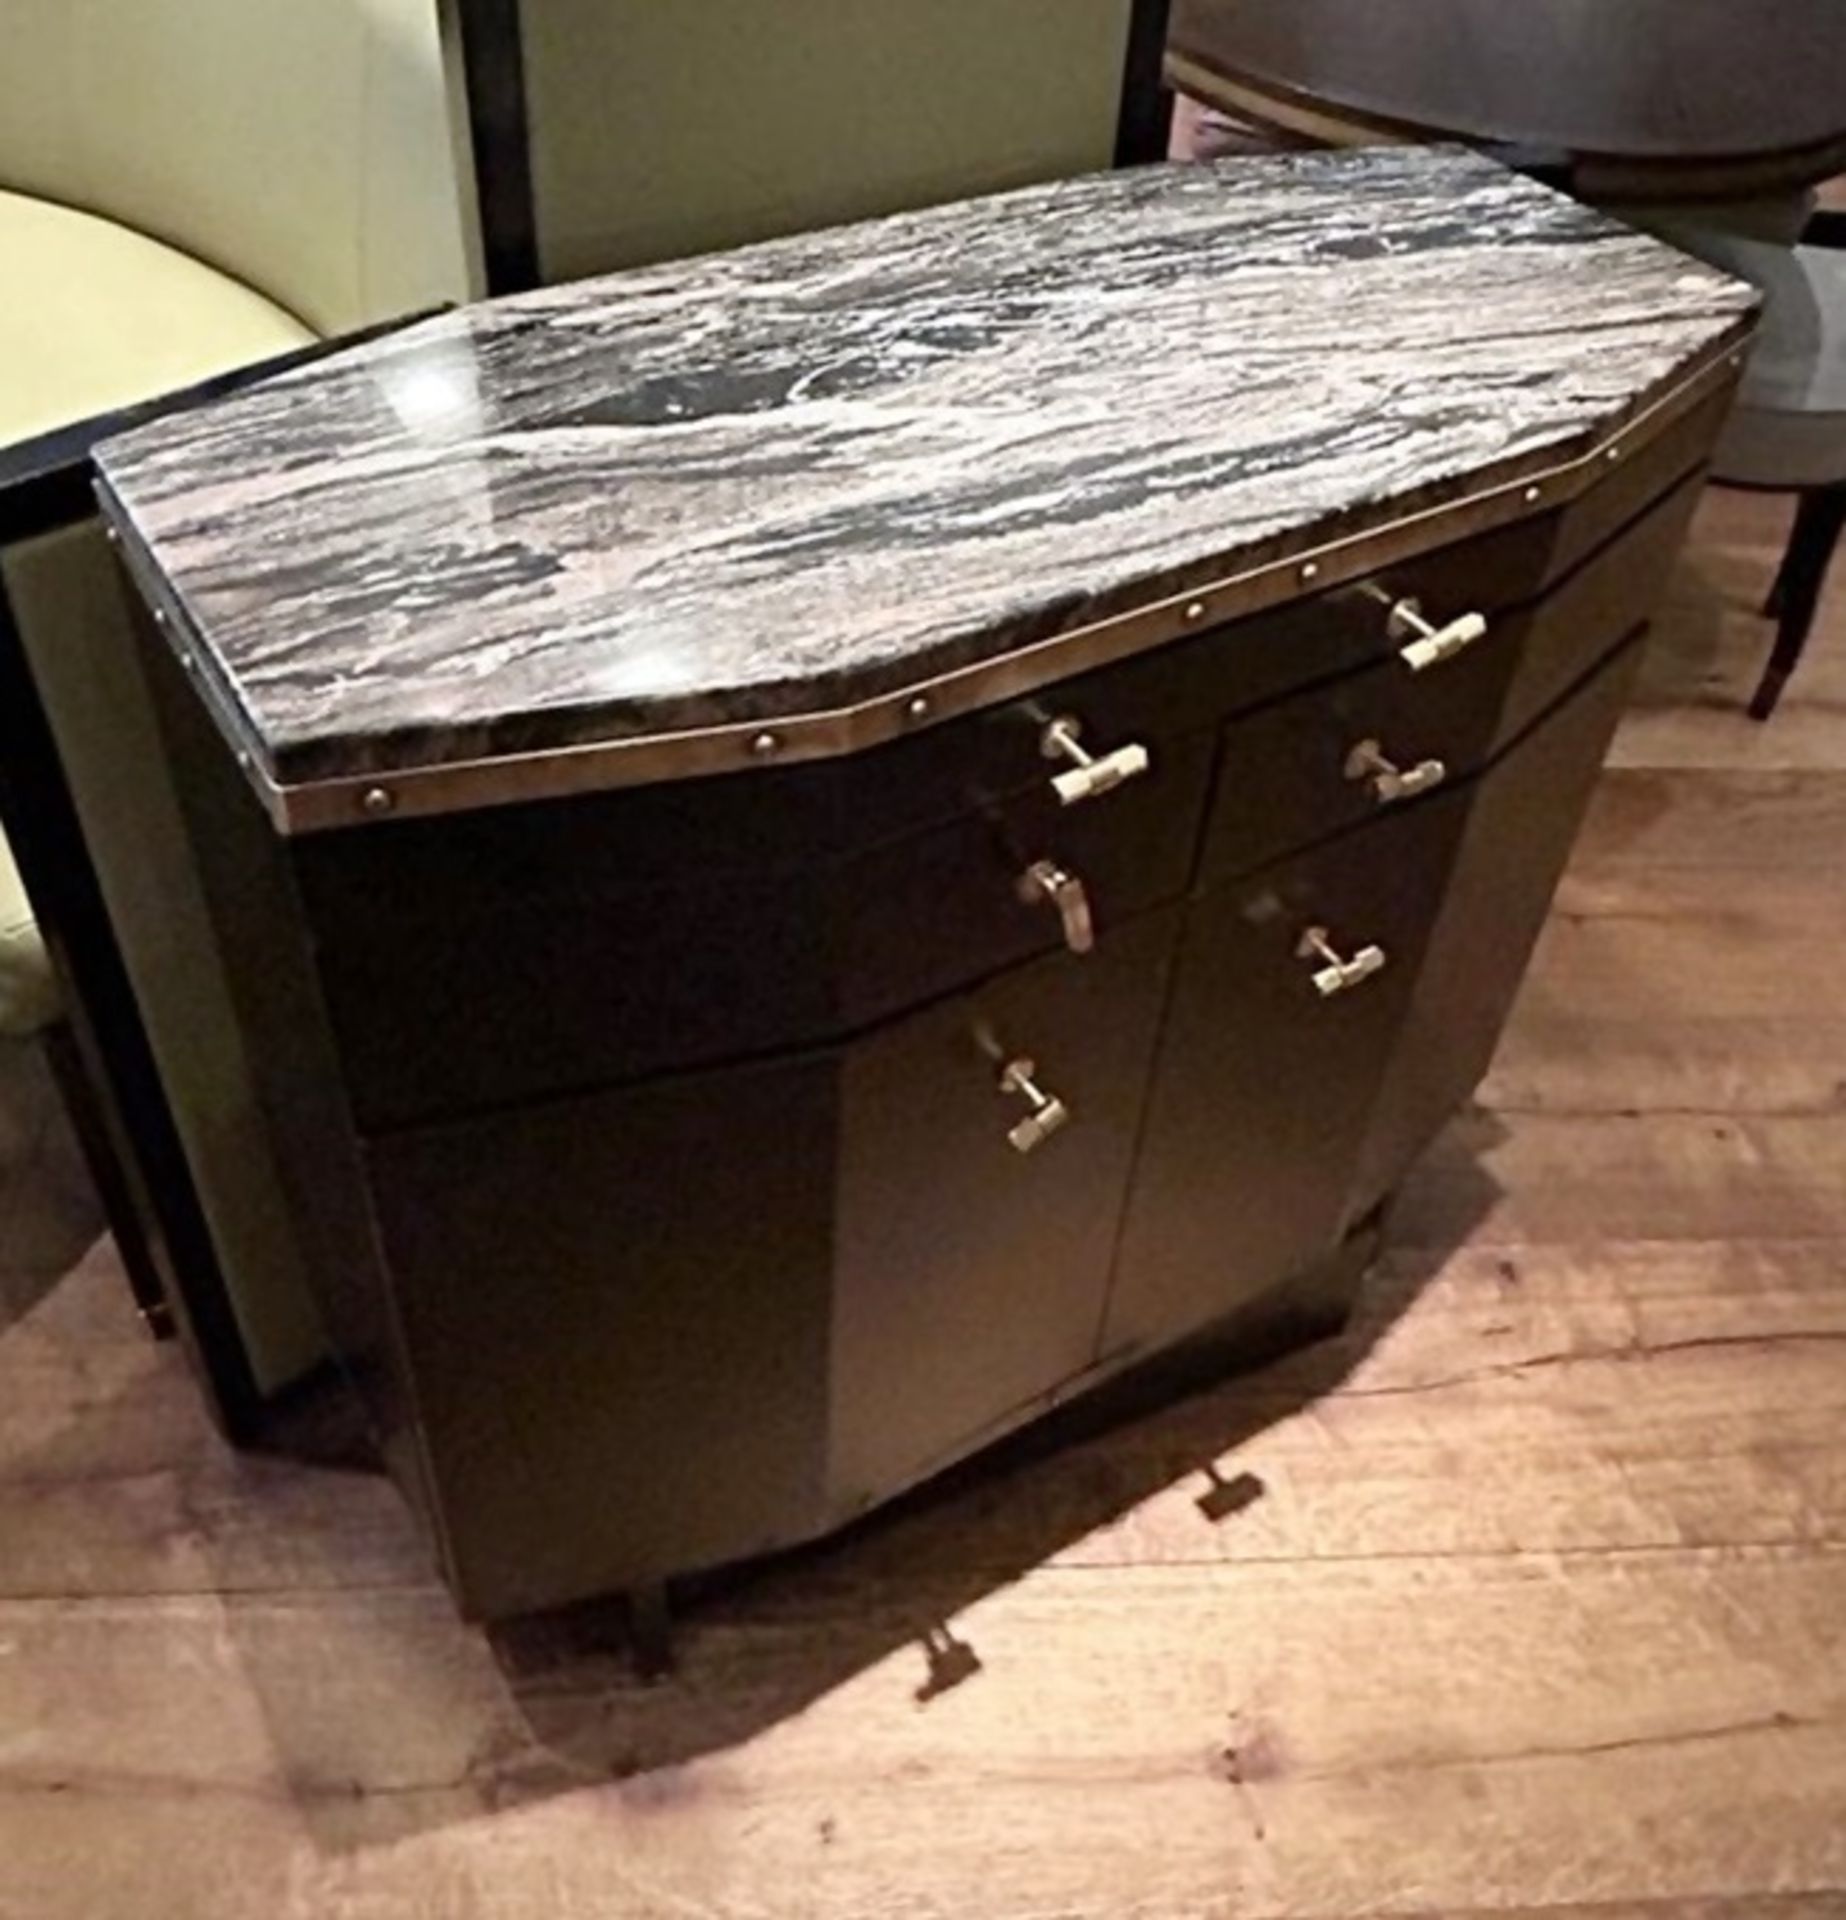 1 x Luxury Stone Topped Sideboard Dresser Finished in Black and Brass Detail - Dimensions: 94x45x90